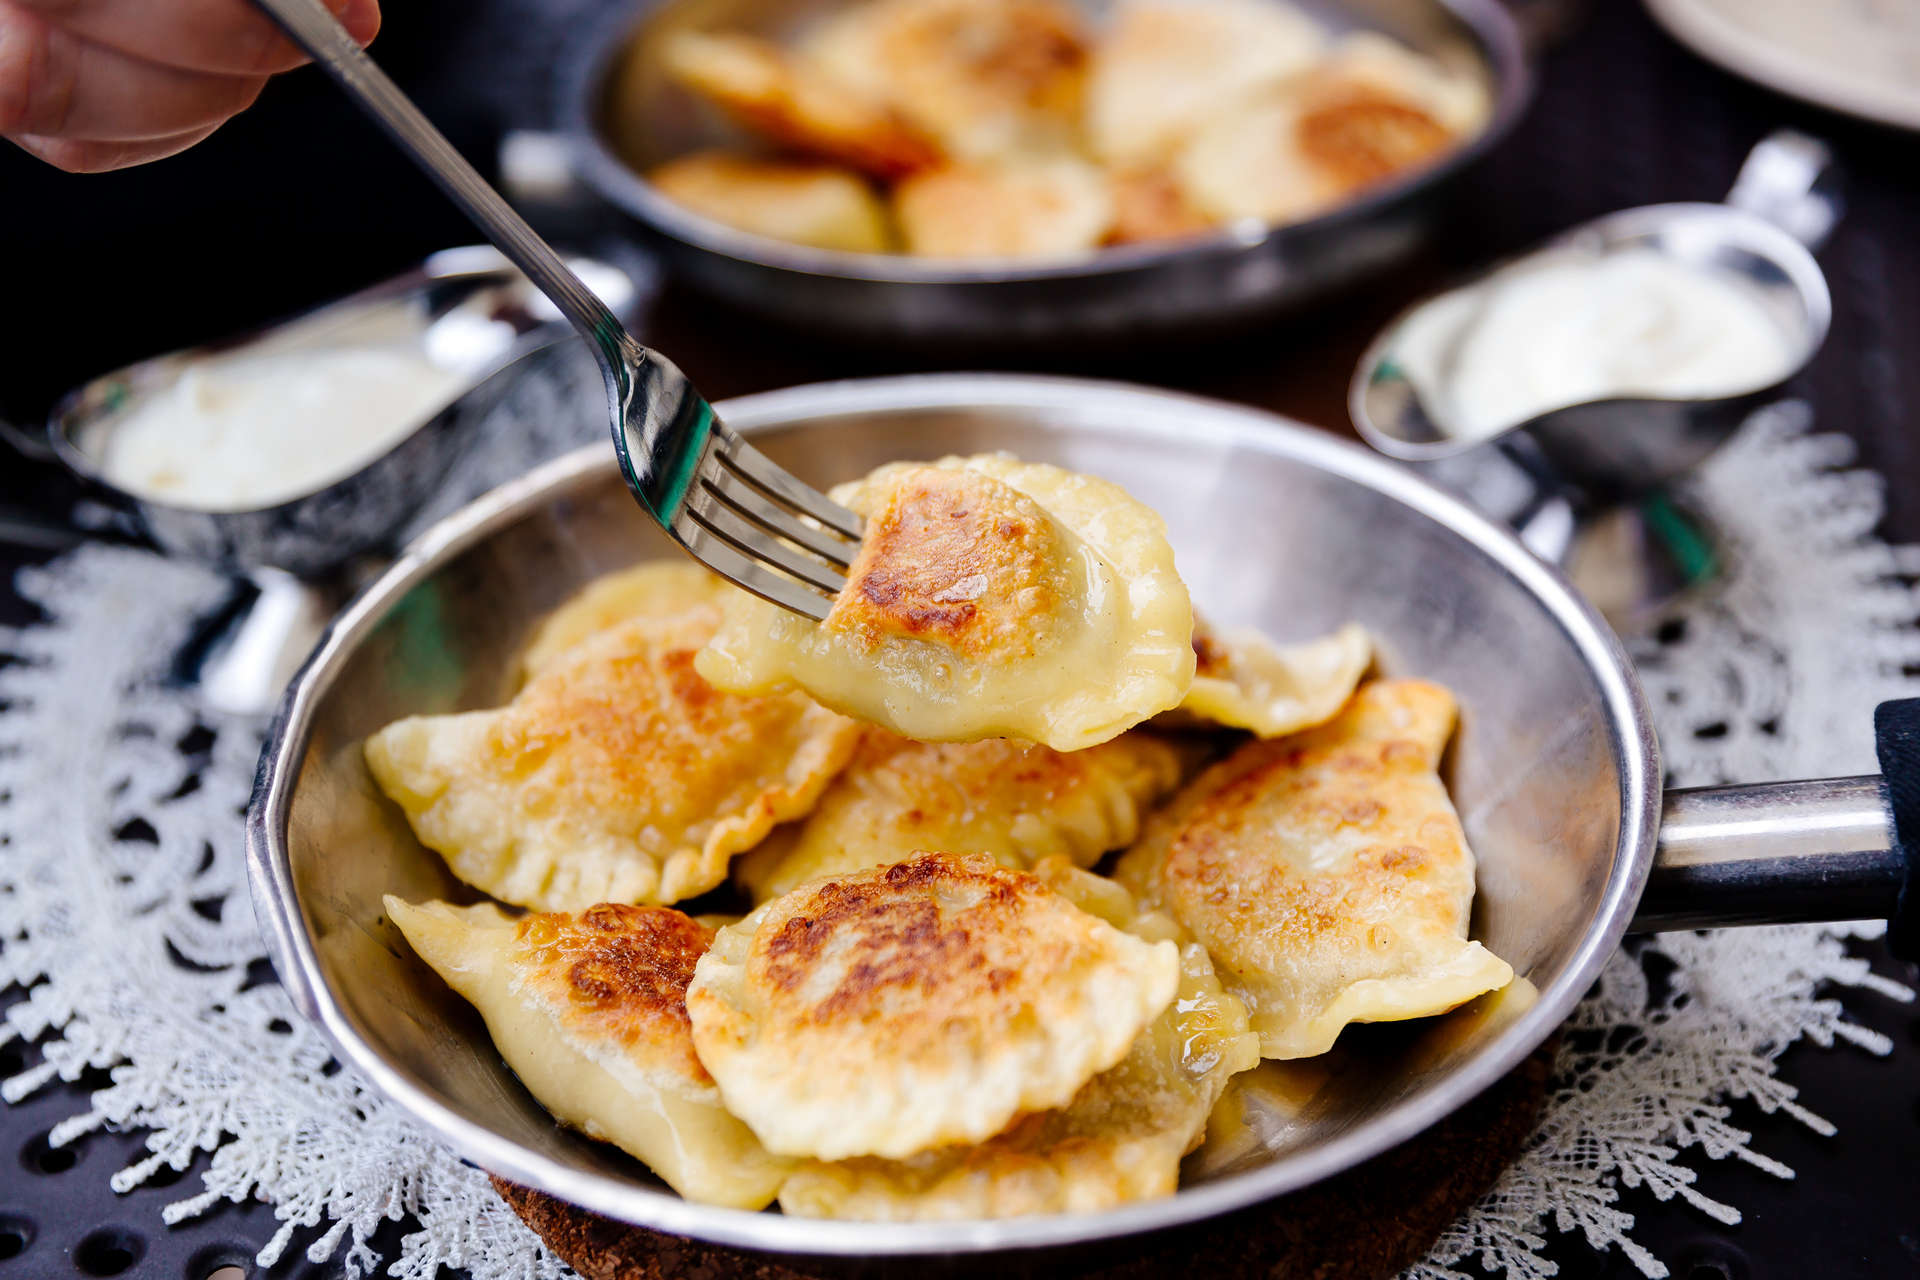 Pierogi are succulent pockets of dough stuffed with a variety of fillings